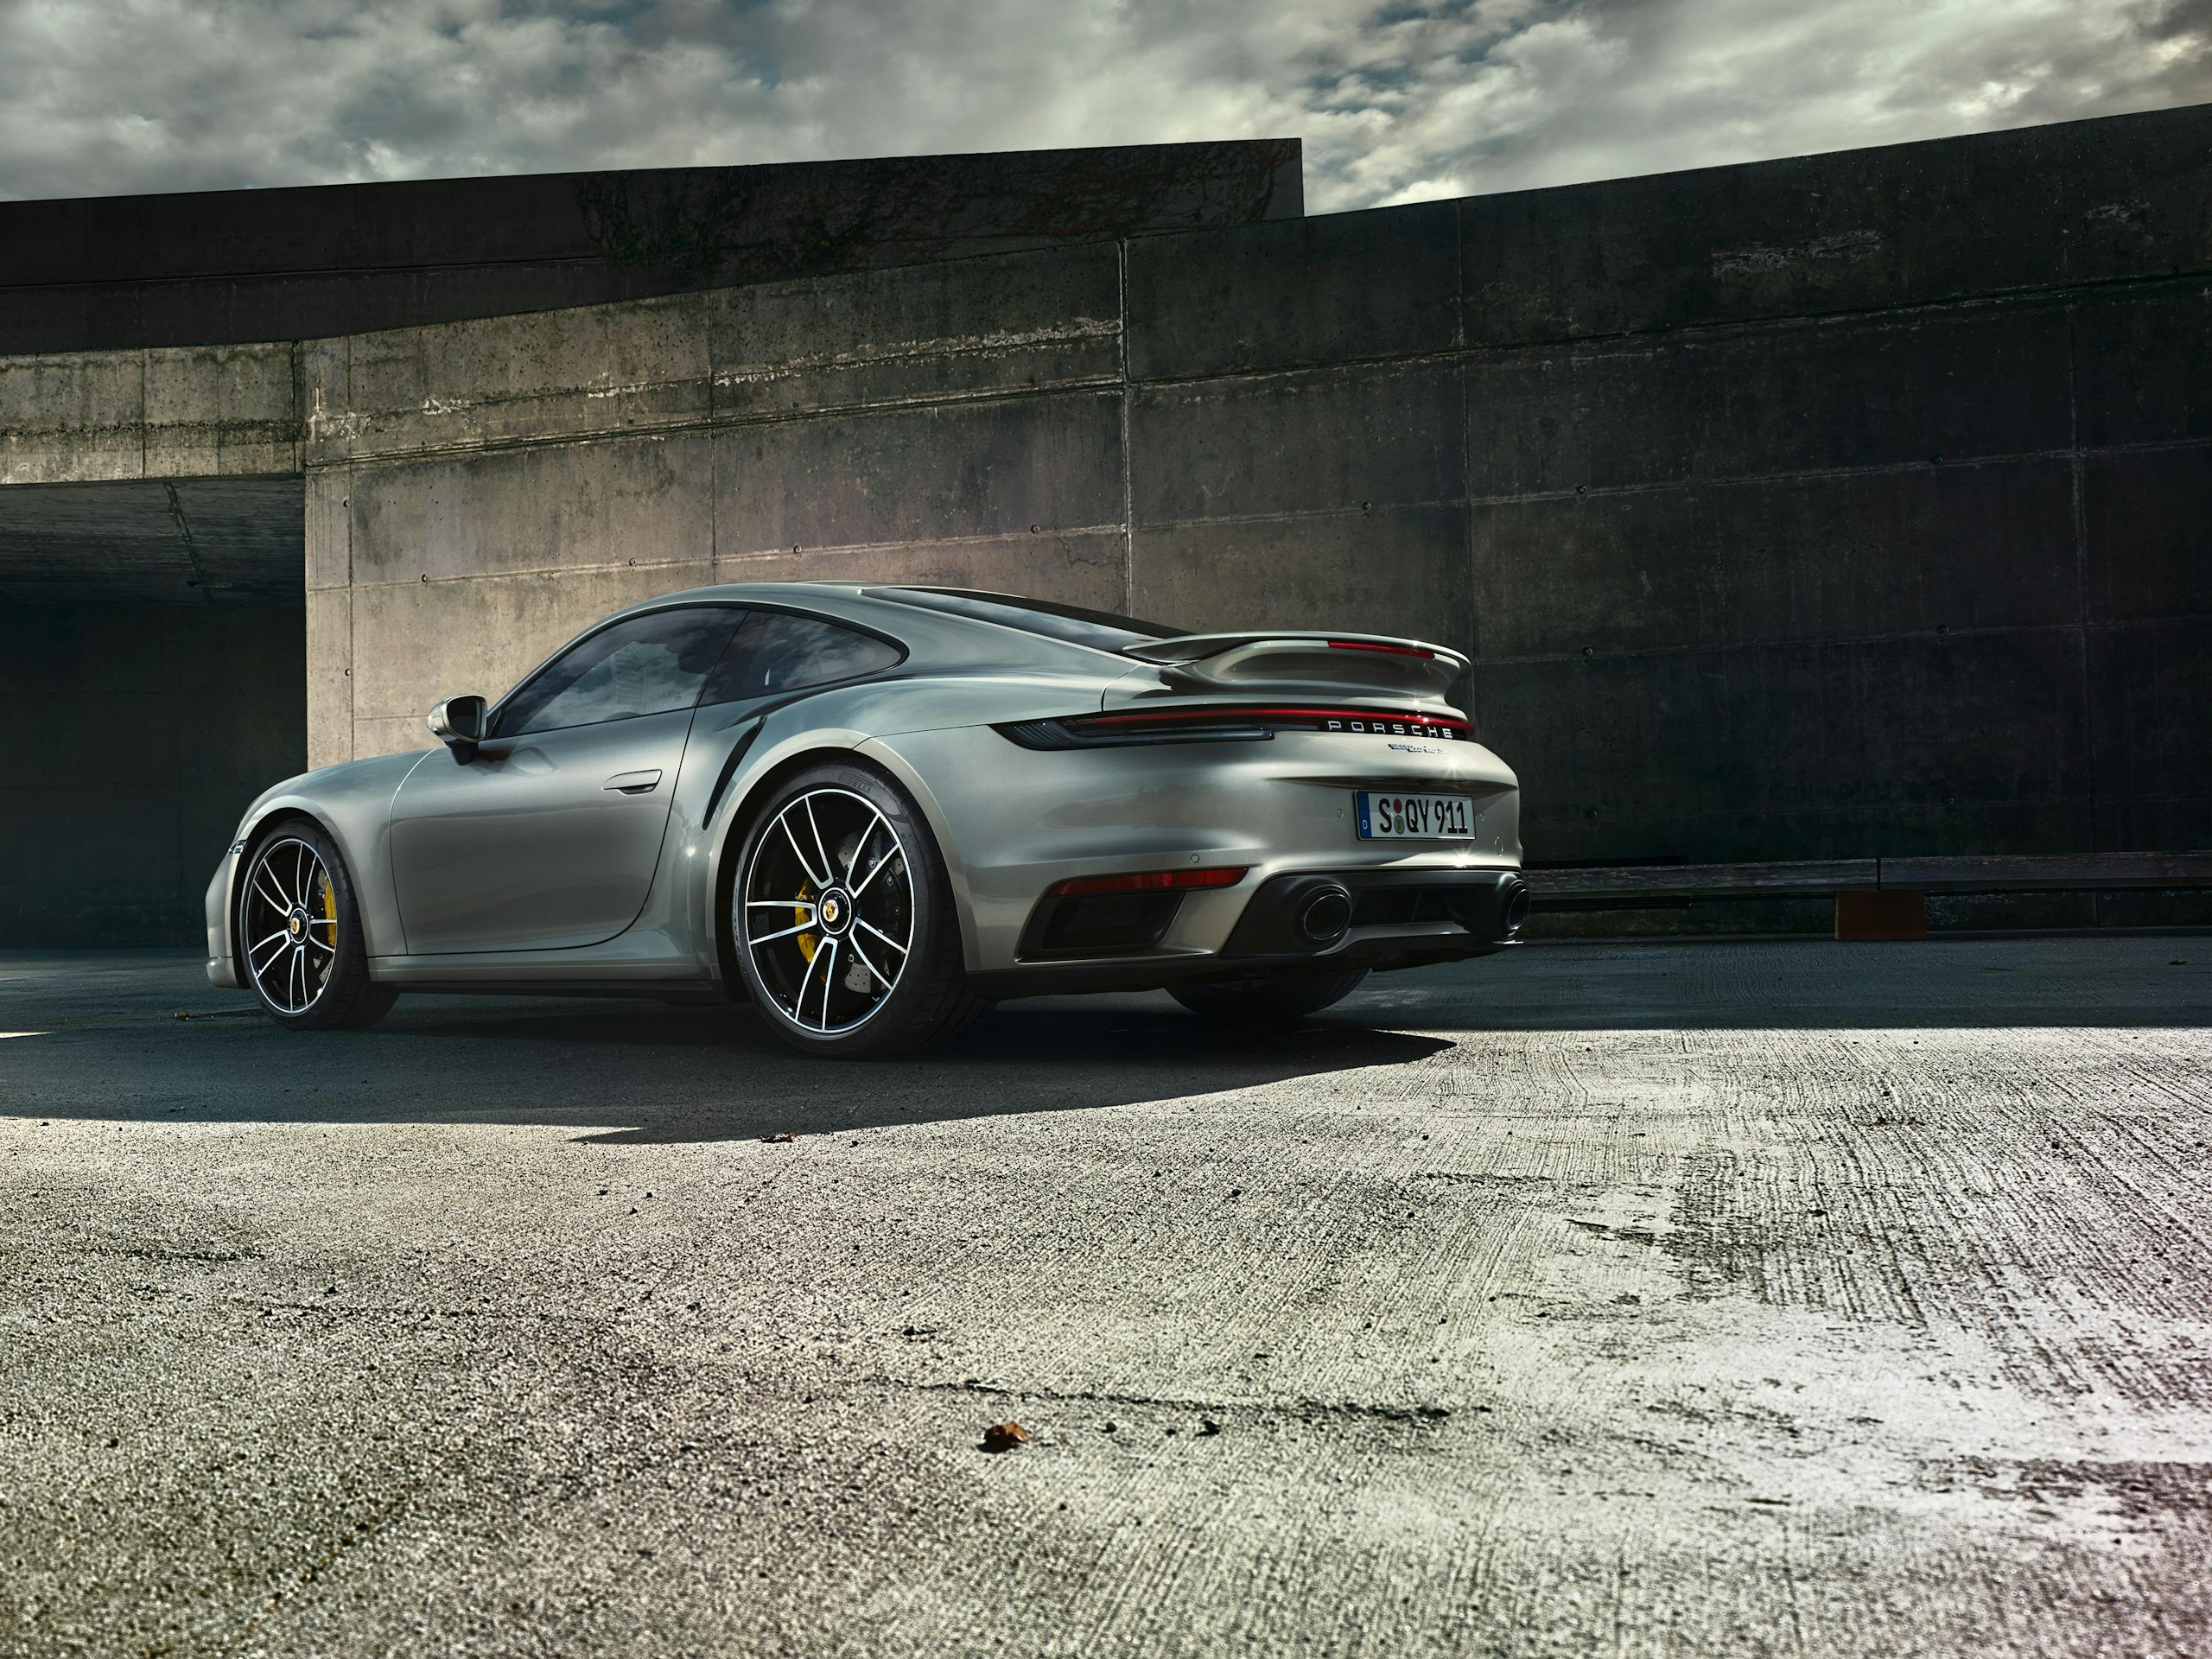 Side shot of a gray 911 Turbo S Coupe standing on an industrial site with older halls